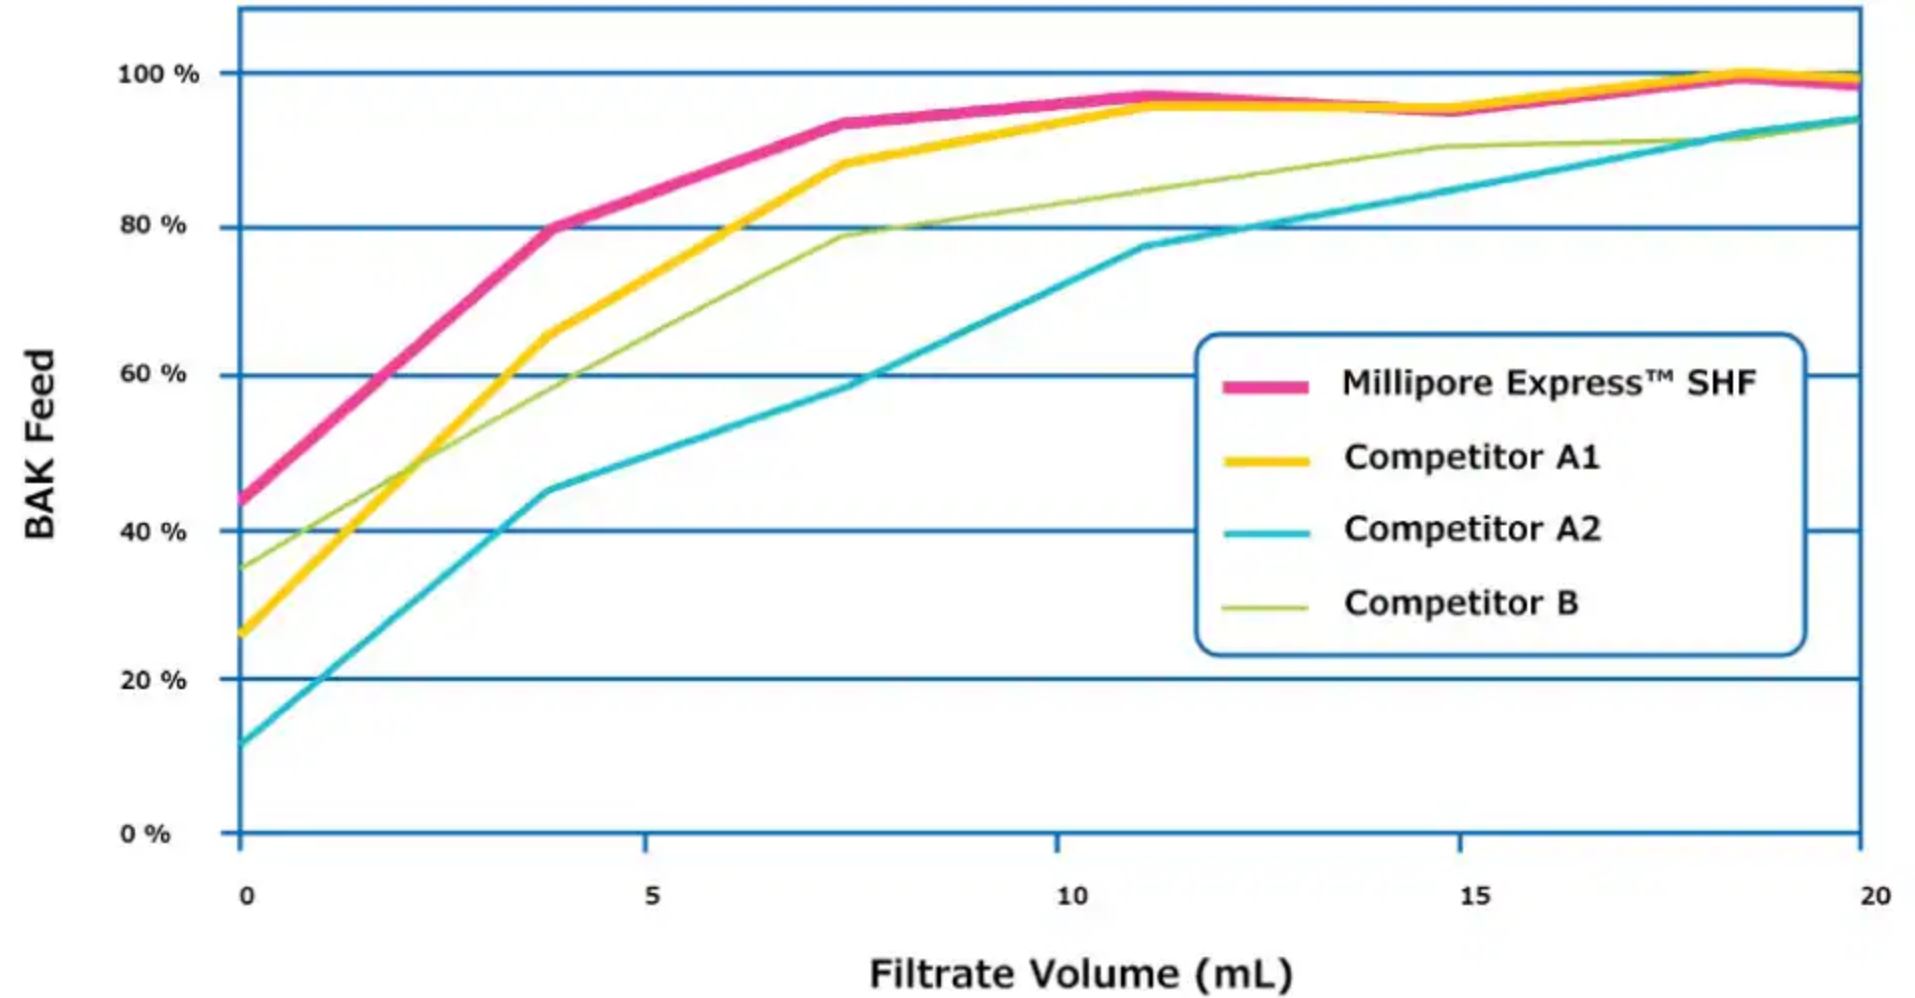 Figure 2. Benzalkonium chloride concentration in filtrate when using PES filters.